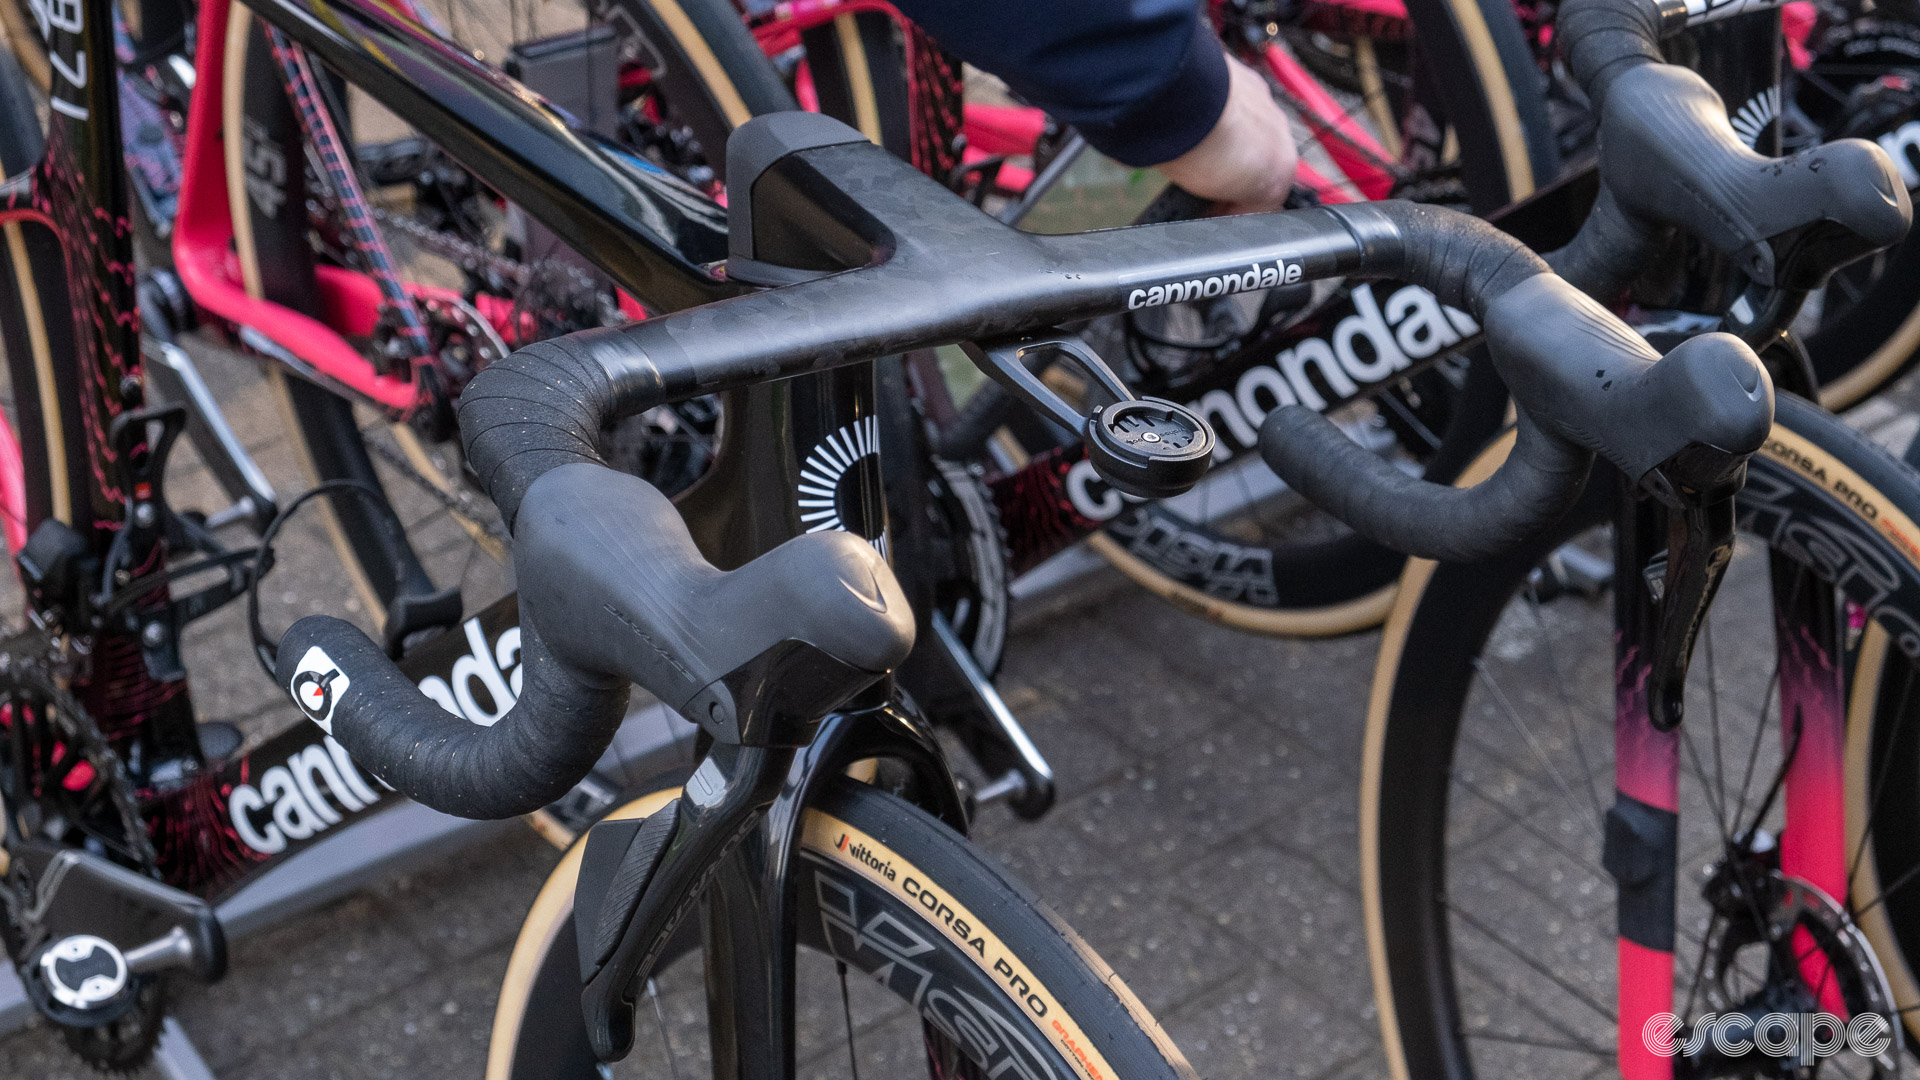 The image shows Alberto Bettiol's handlebars from the front.